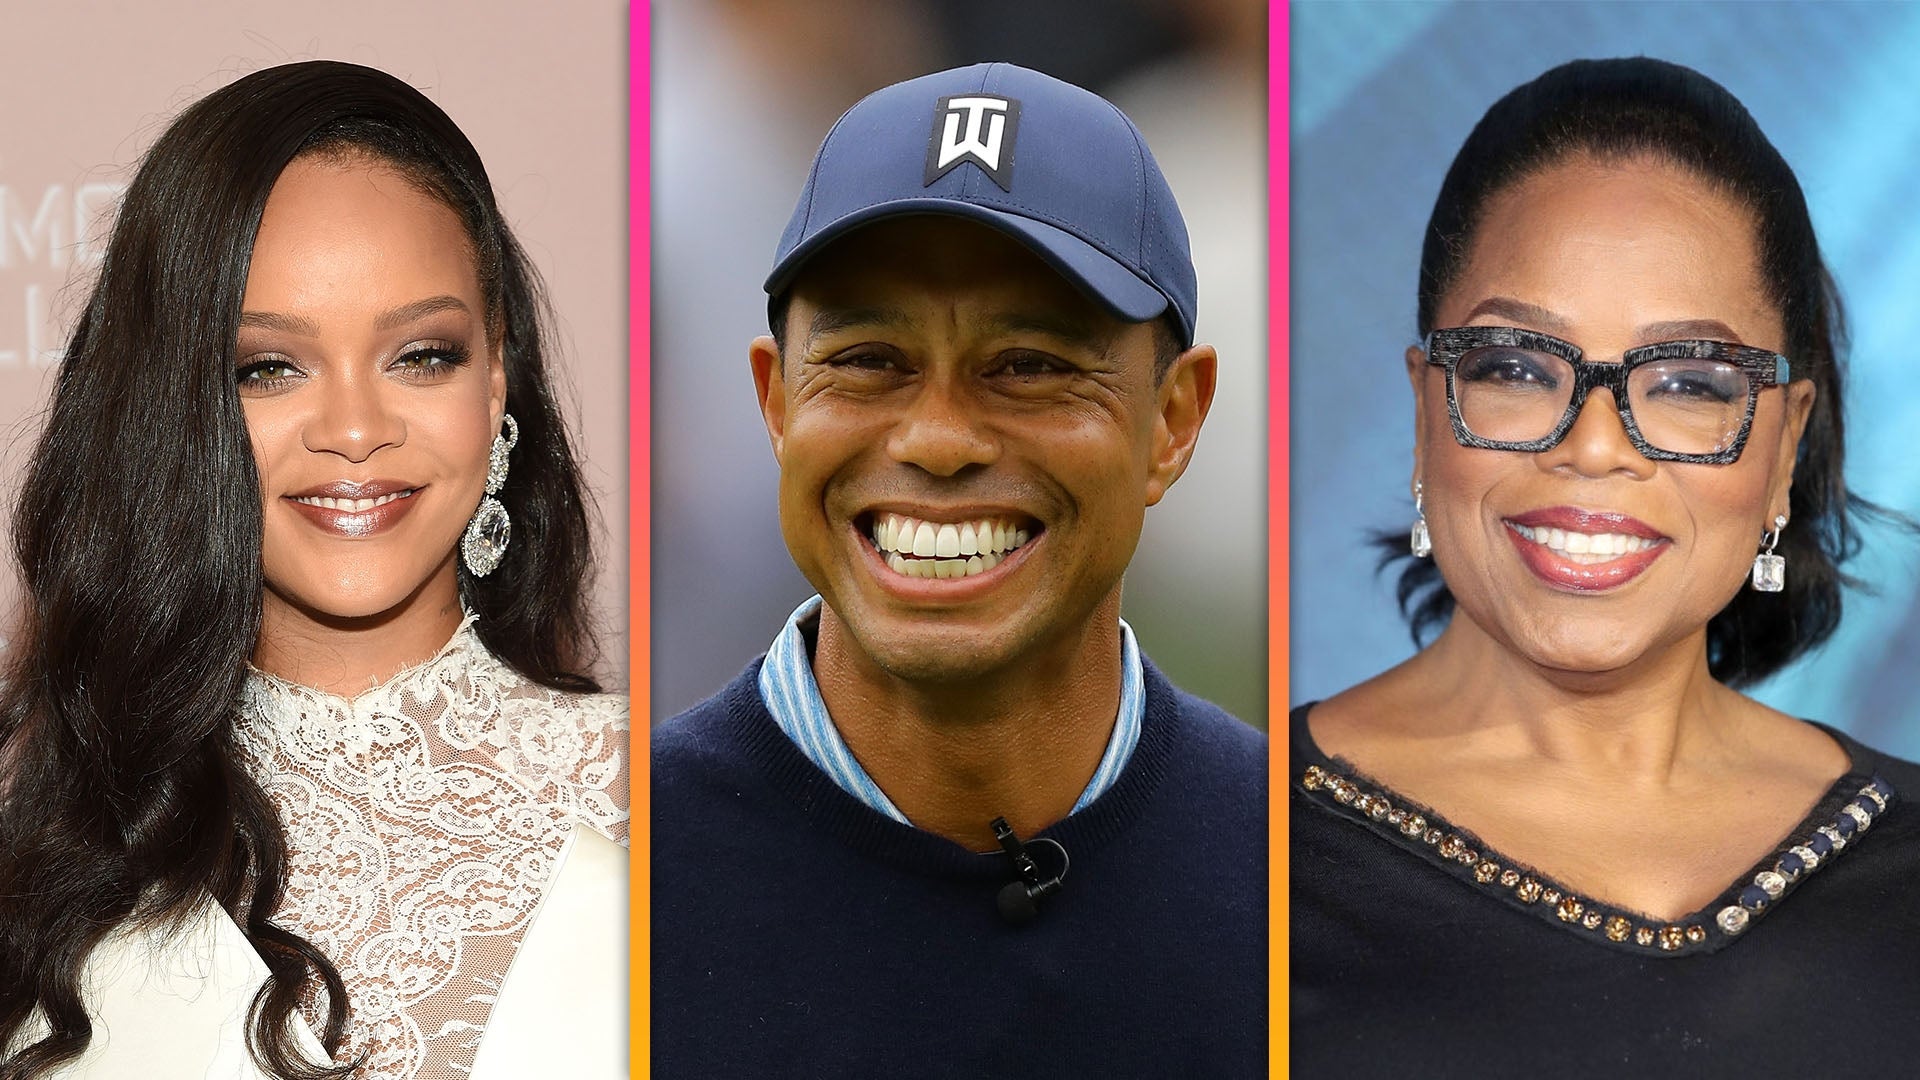 How the Mega Millions’ $1.1B Jackpot Stacks Up to These Celebs’ Net Worths